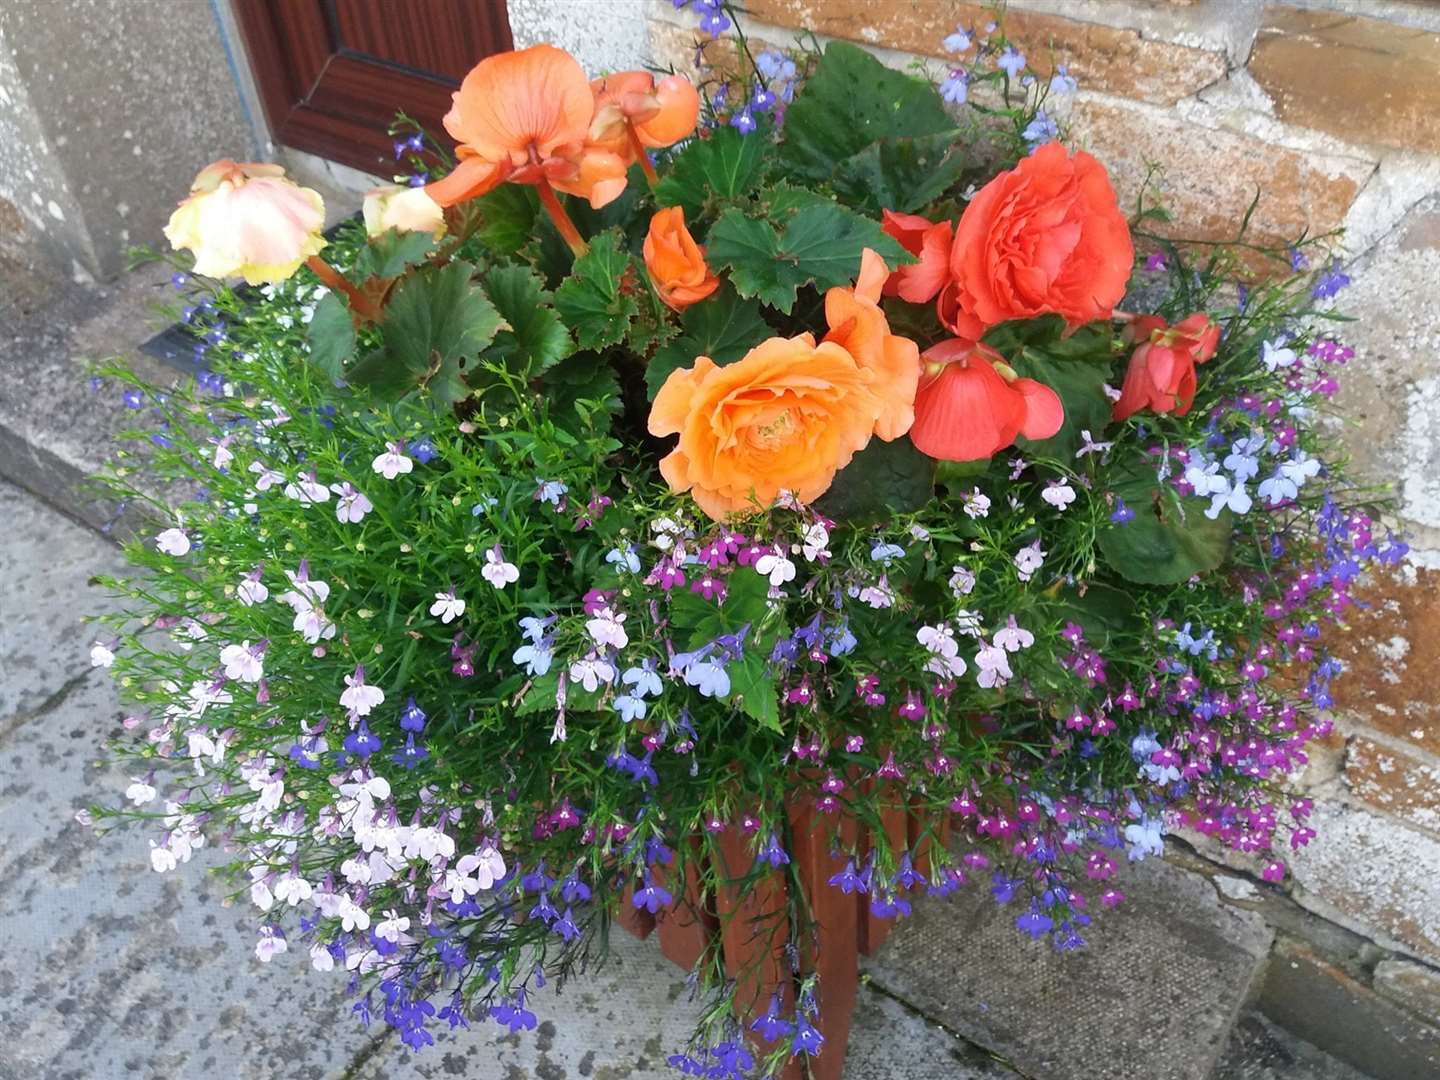 The patio planter section proved popular with 16 entries as of Monday afternoon. This one was sent in by Janet Mowat.